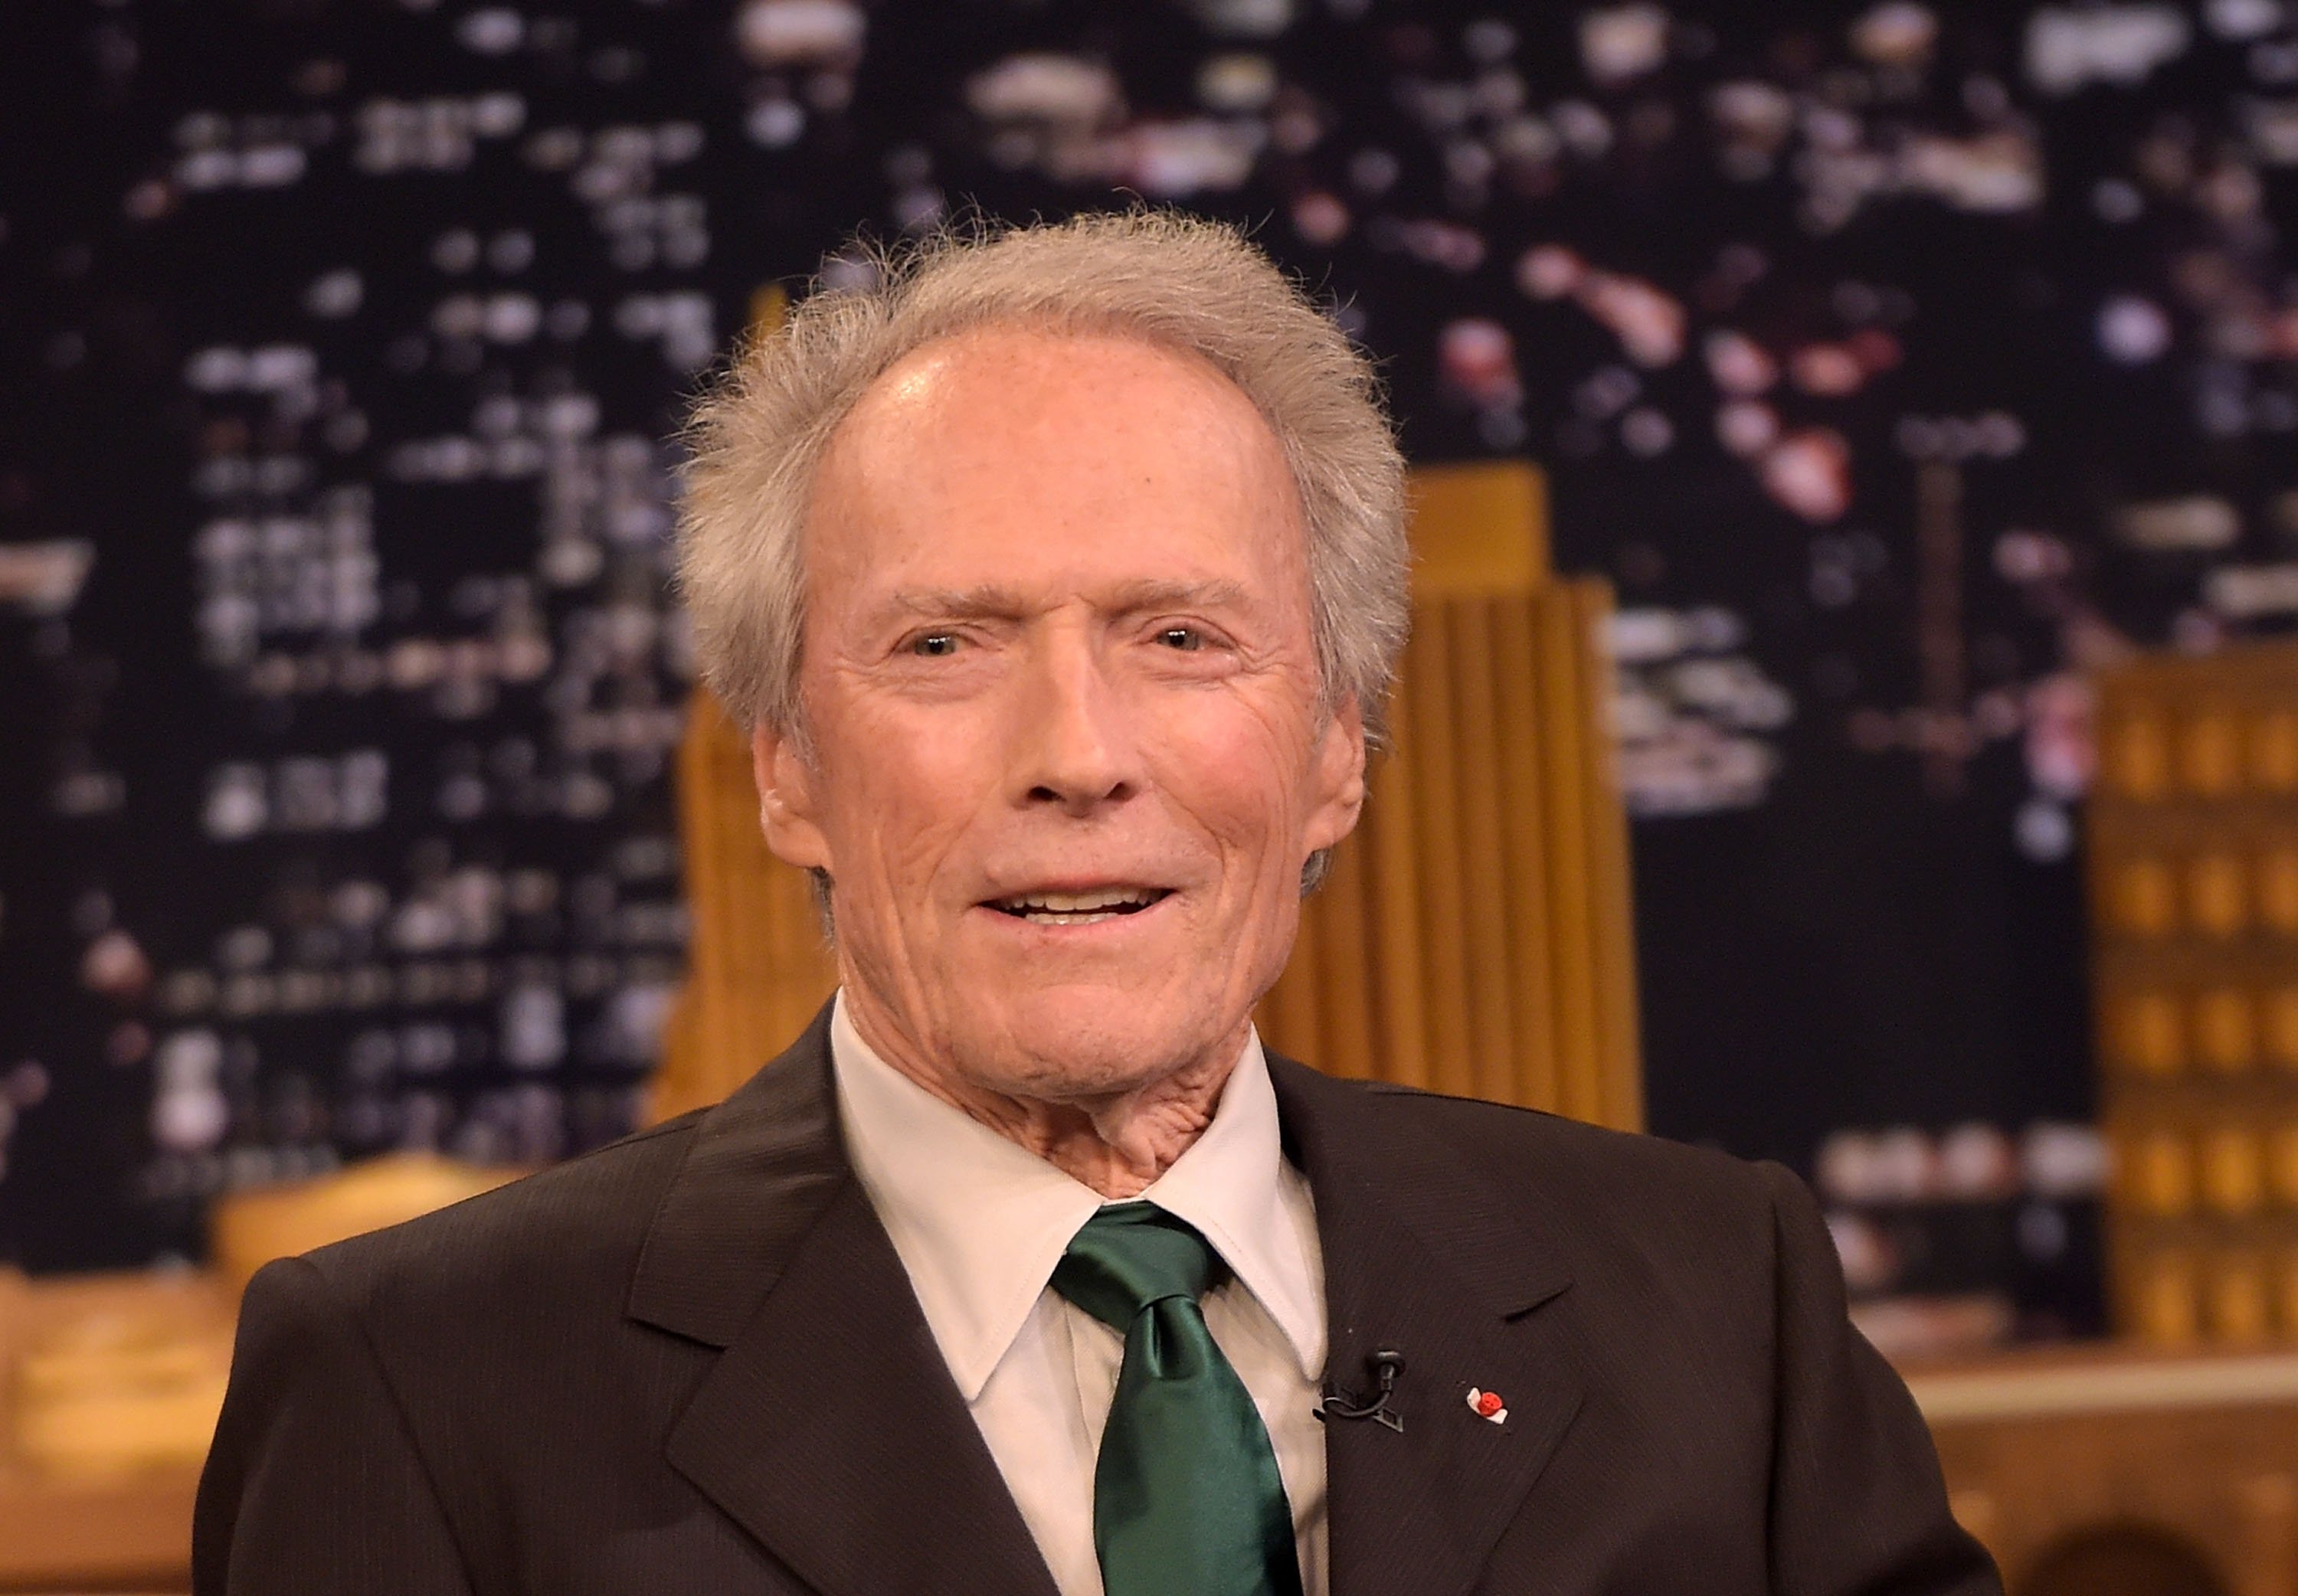 Clint Eastwood besucht am 6. September 2016 in New York City "The Tonight Show Starring Jimmy Fallon" im Rockefeller Center. | Quelle: Getty Images